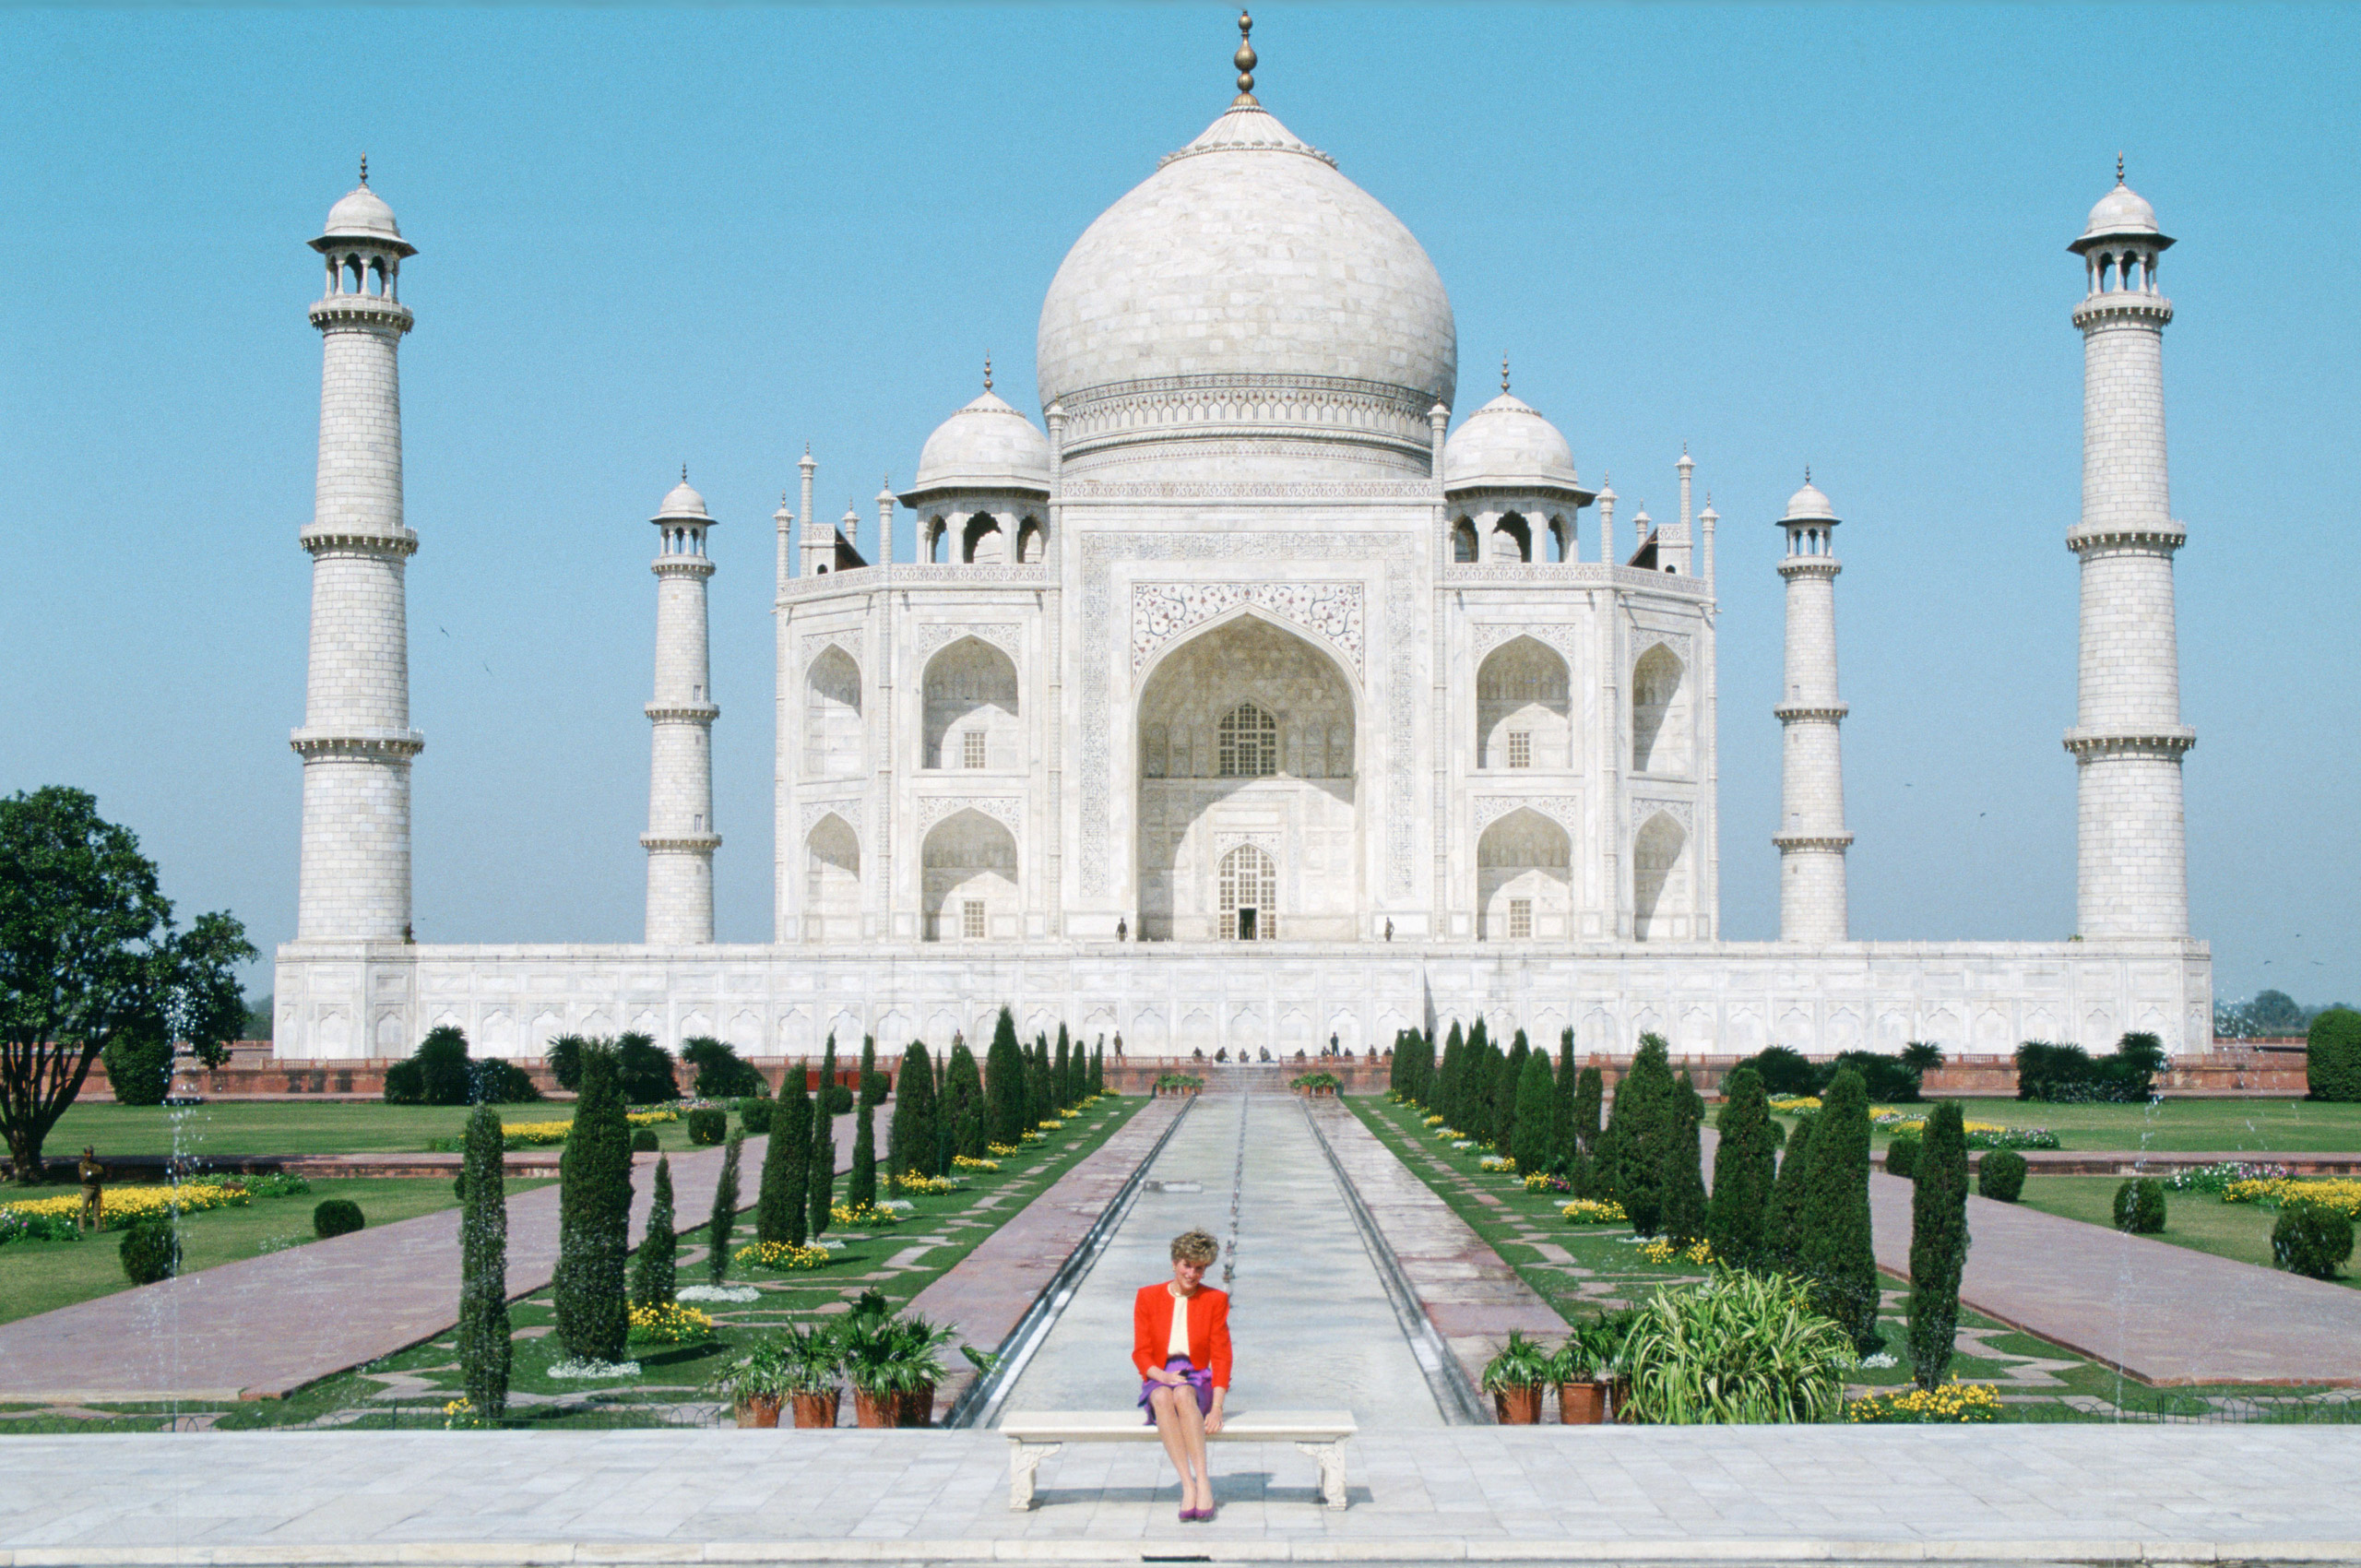 Diana Princess of Wales sits in front of the Taj Mahal during a visit to India, Feb. 11, 1992. (Tim Graham—Getty Images)